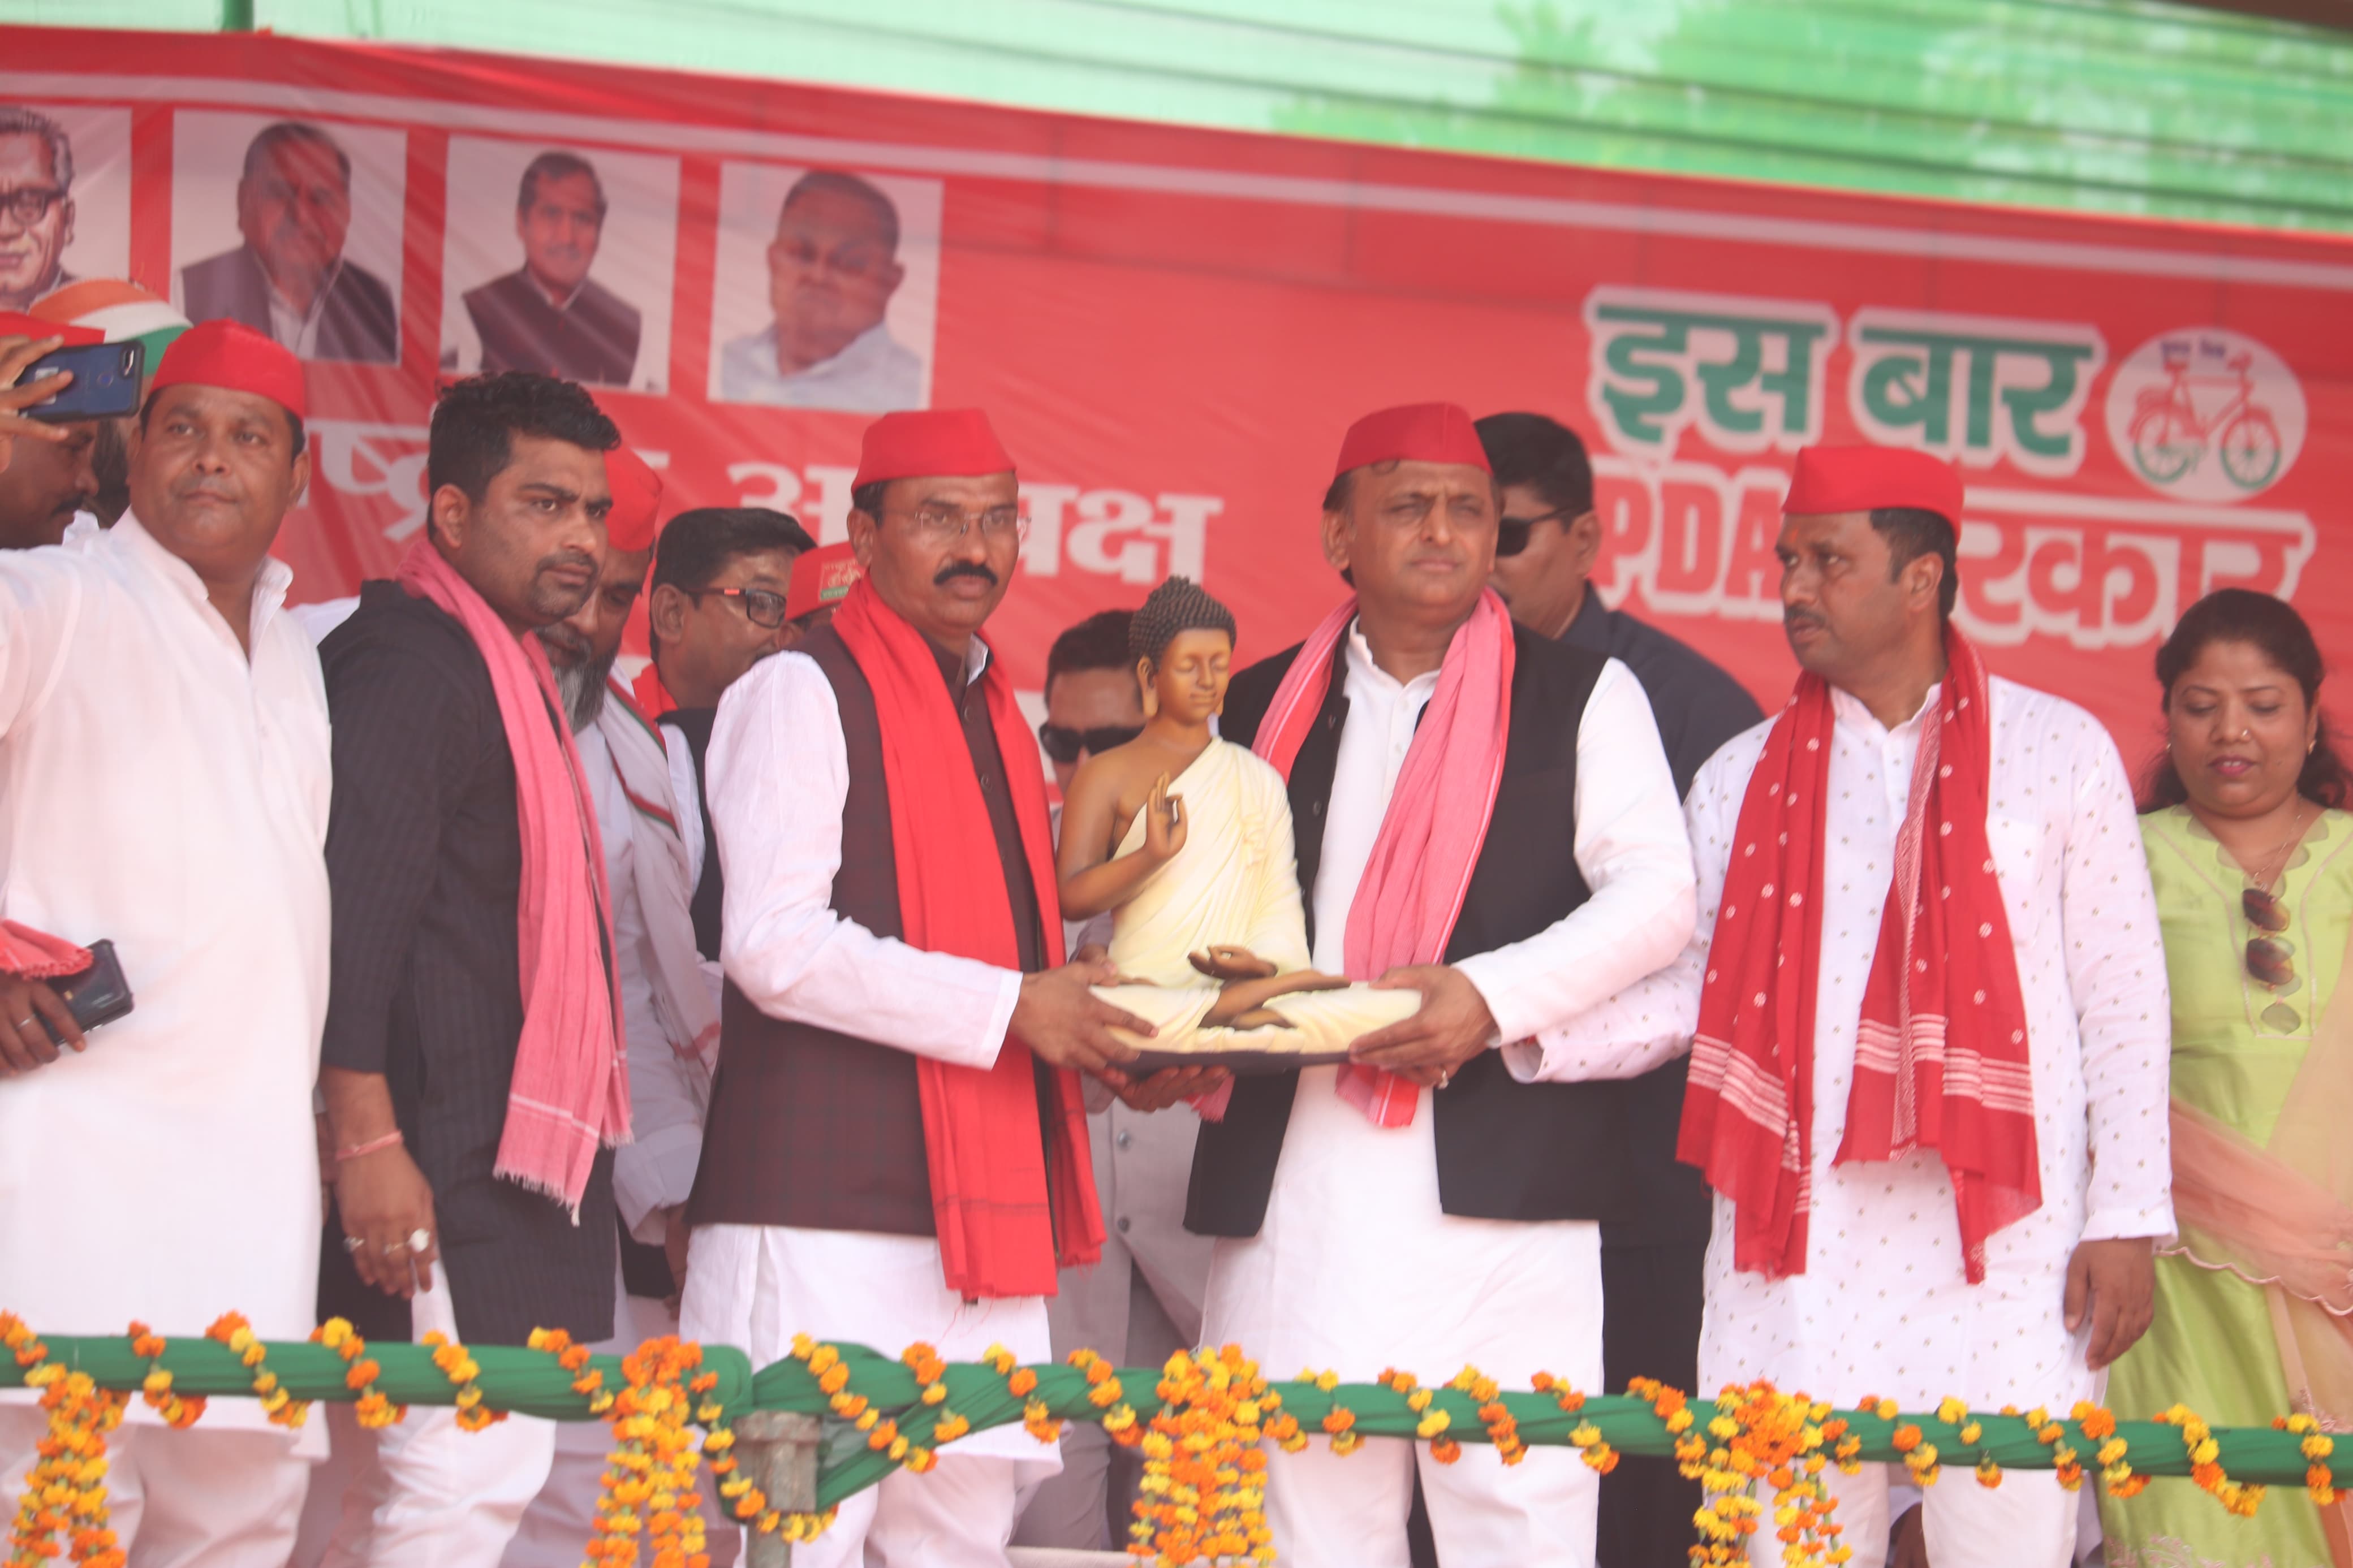 The country's emperor is leaving, that's why BJP is missing the princes - Akhilesh Yadav